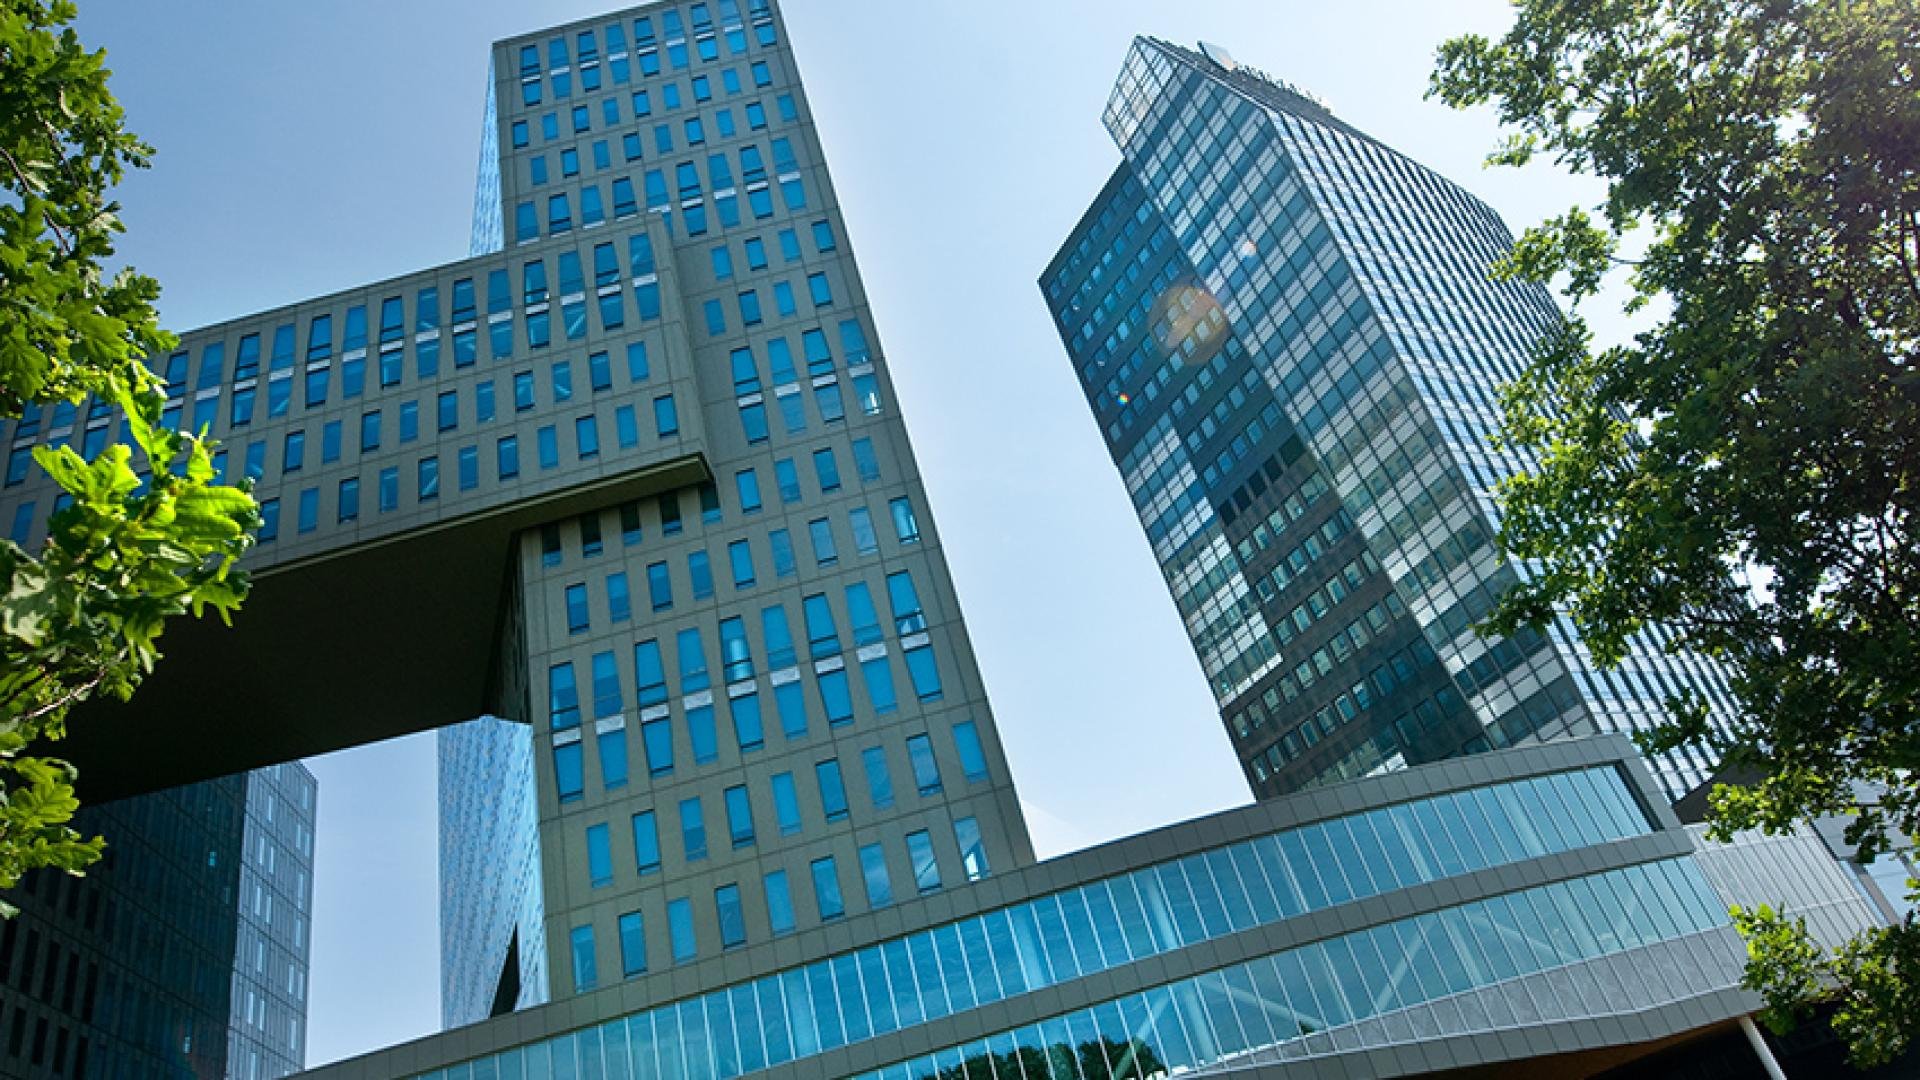 Two office towers in Zwolle